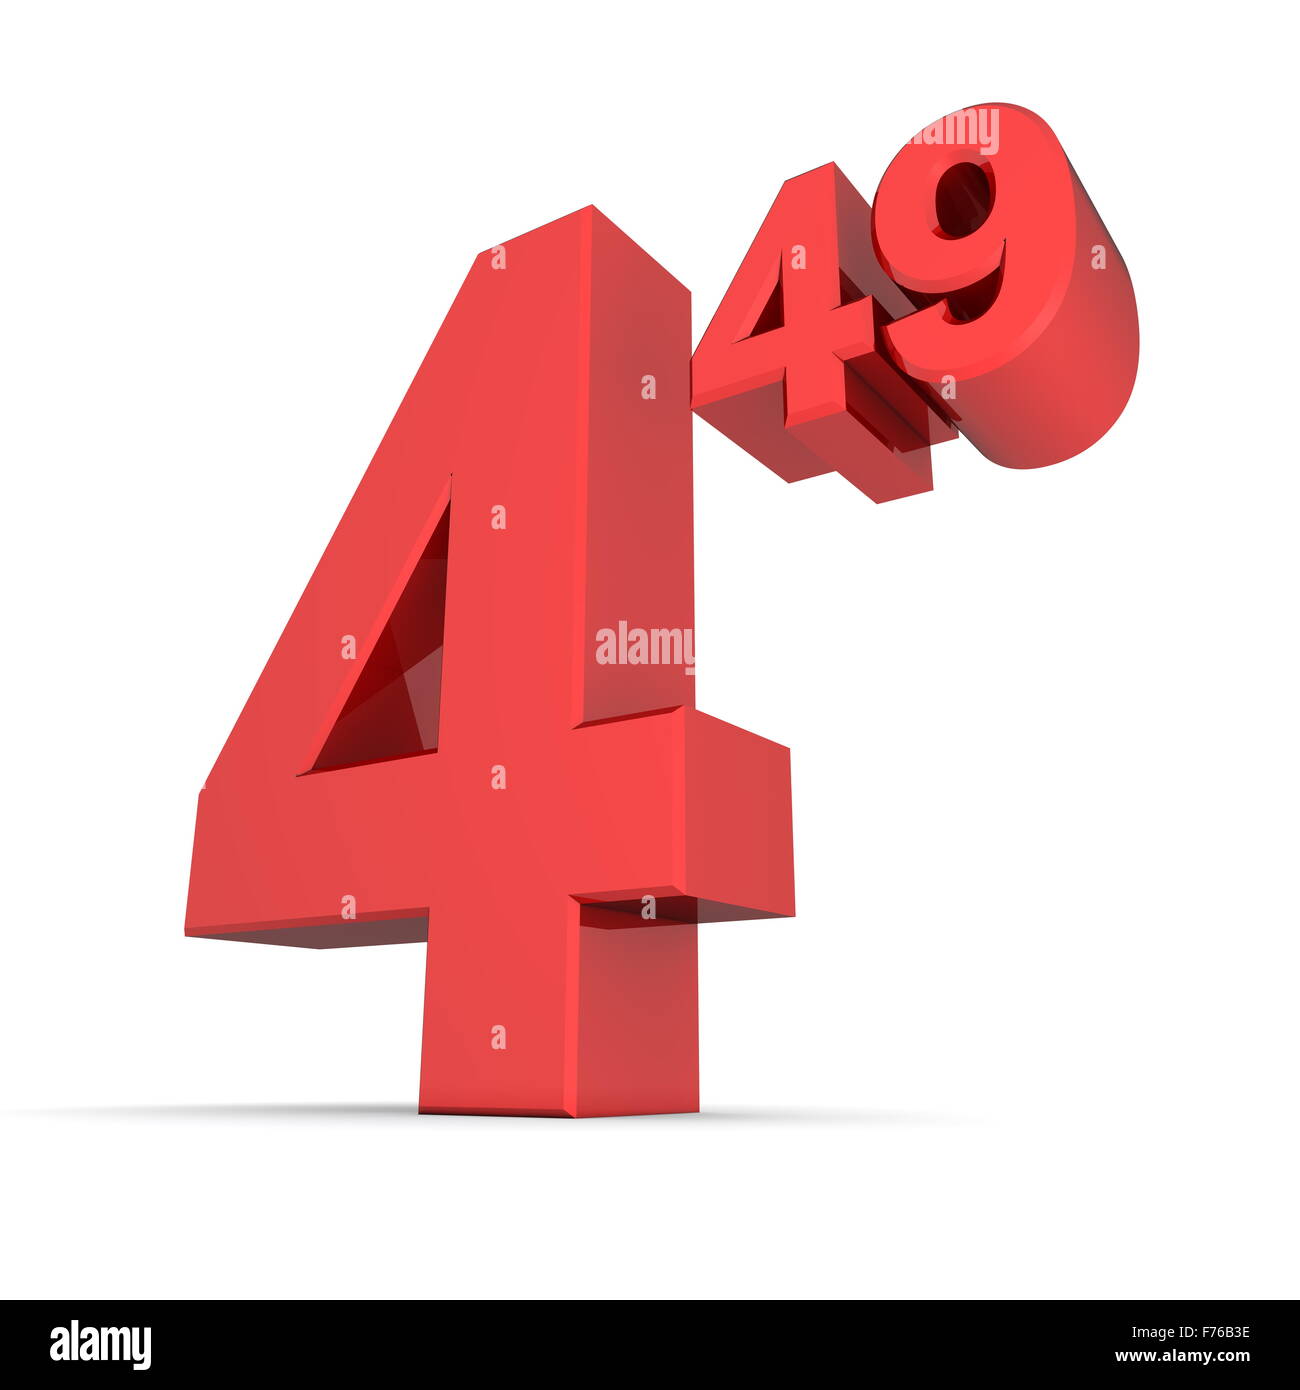 Solid Price Tag Number 4.49 - Shiny Red Stock Photo